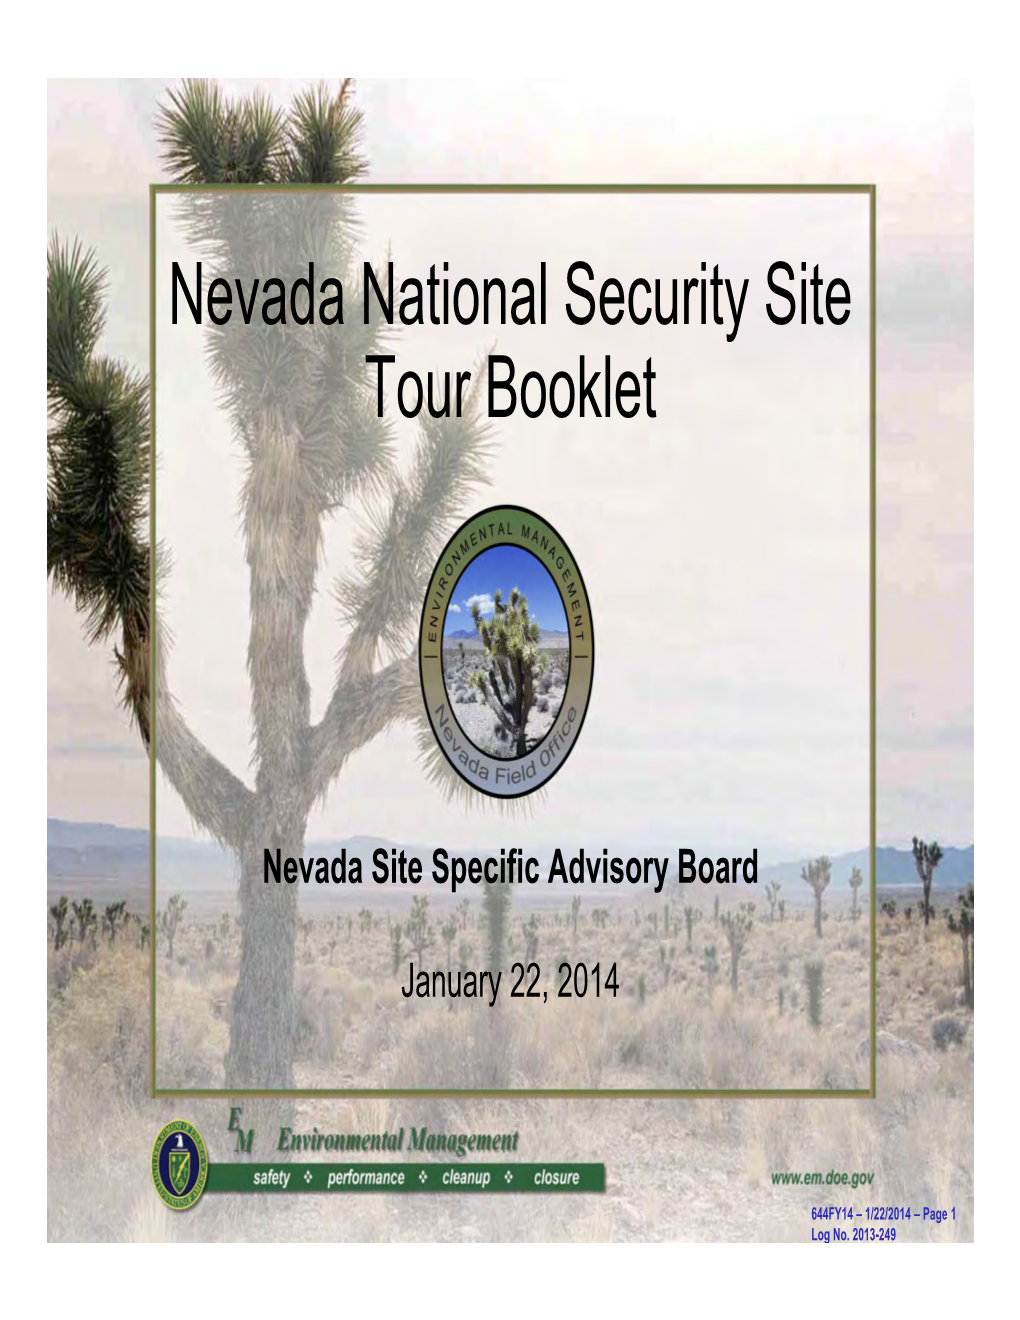 Nevada National Security Site Tour Booklet